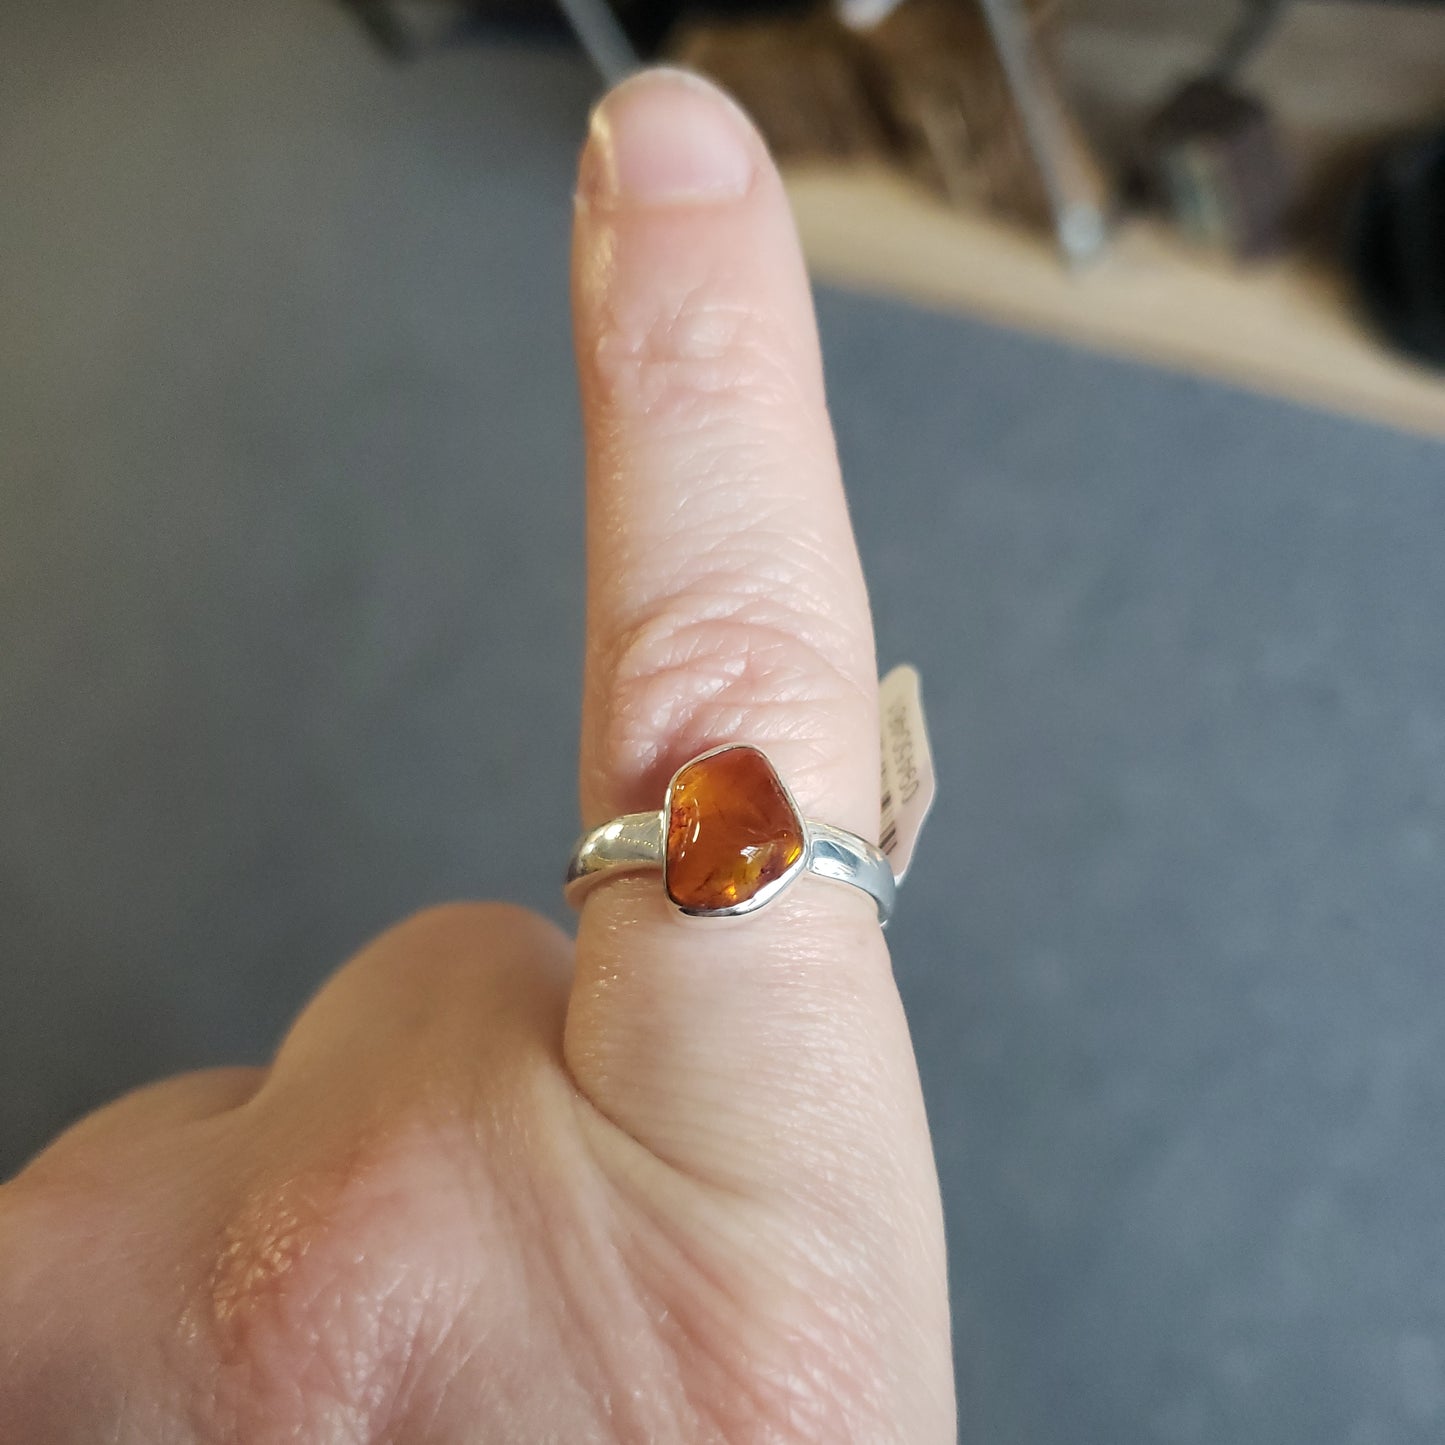 Amber Nectar Droplet Rings